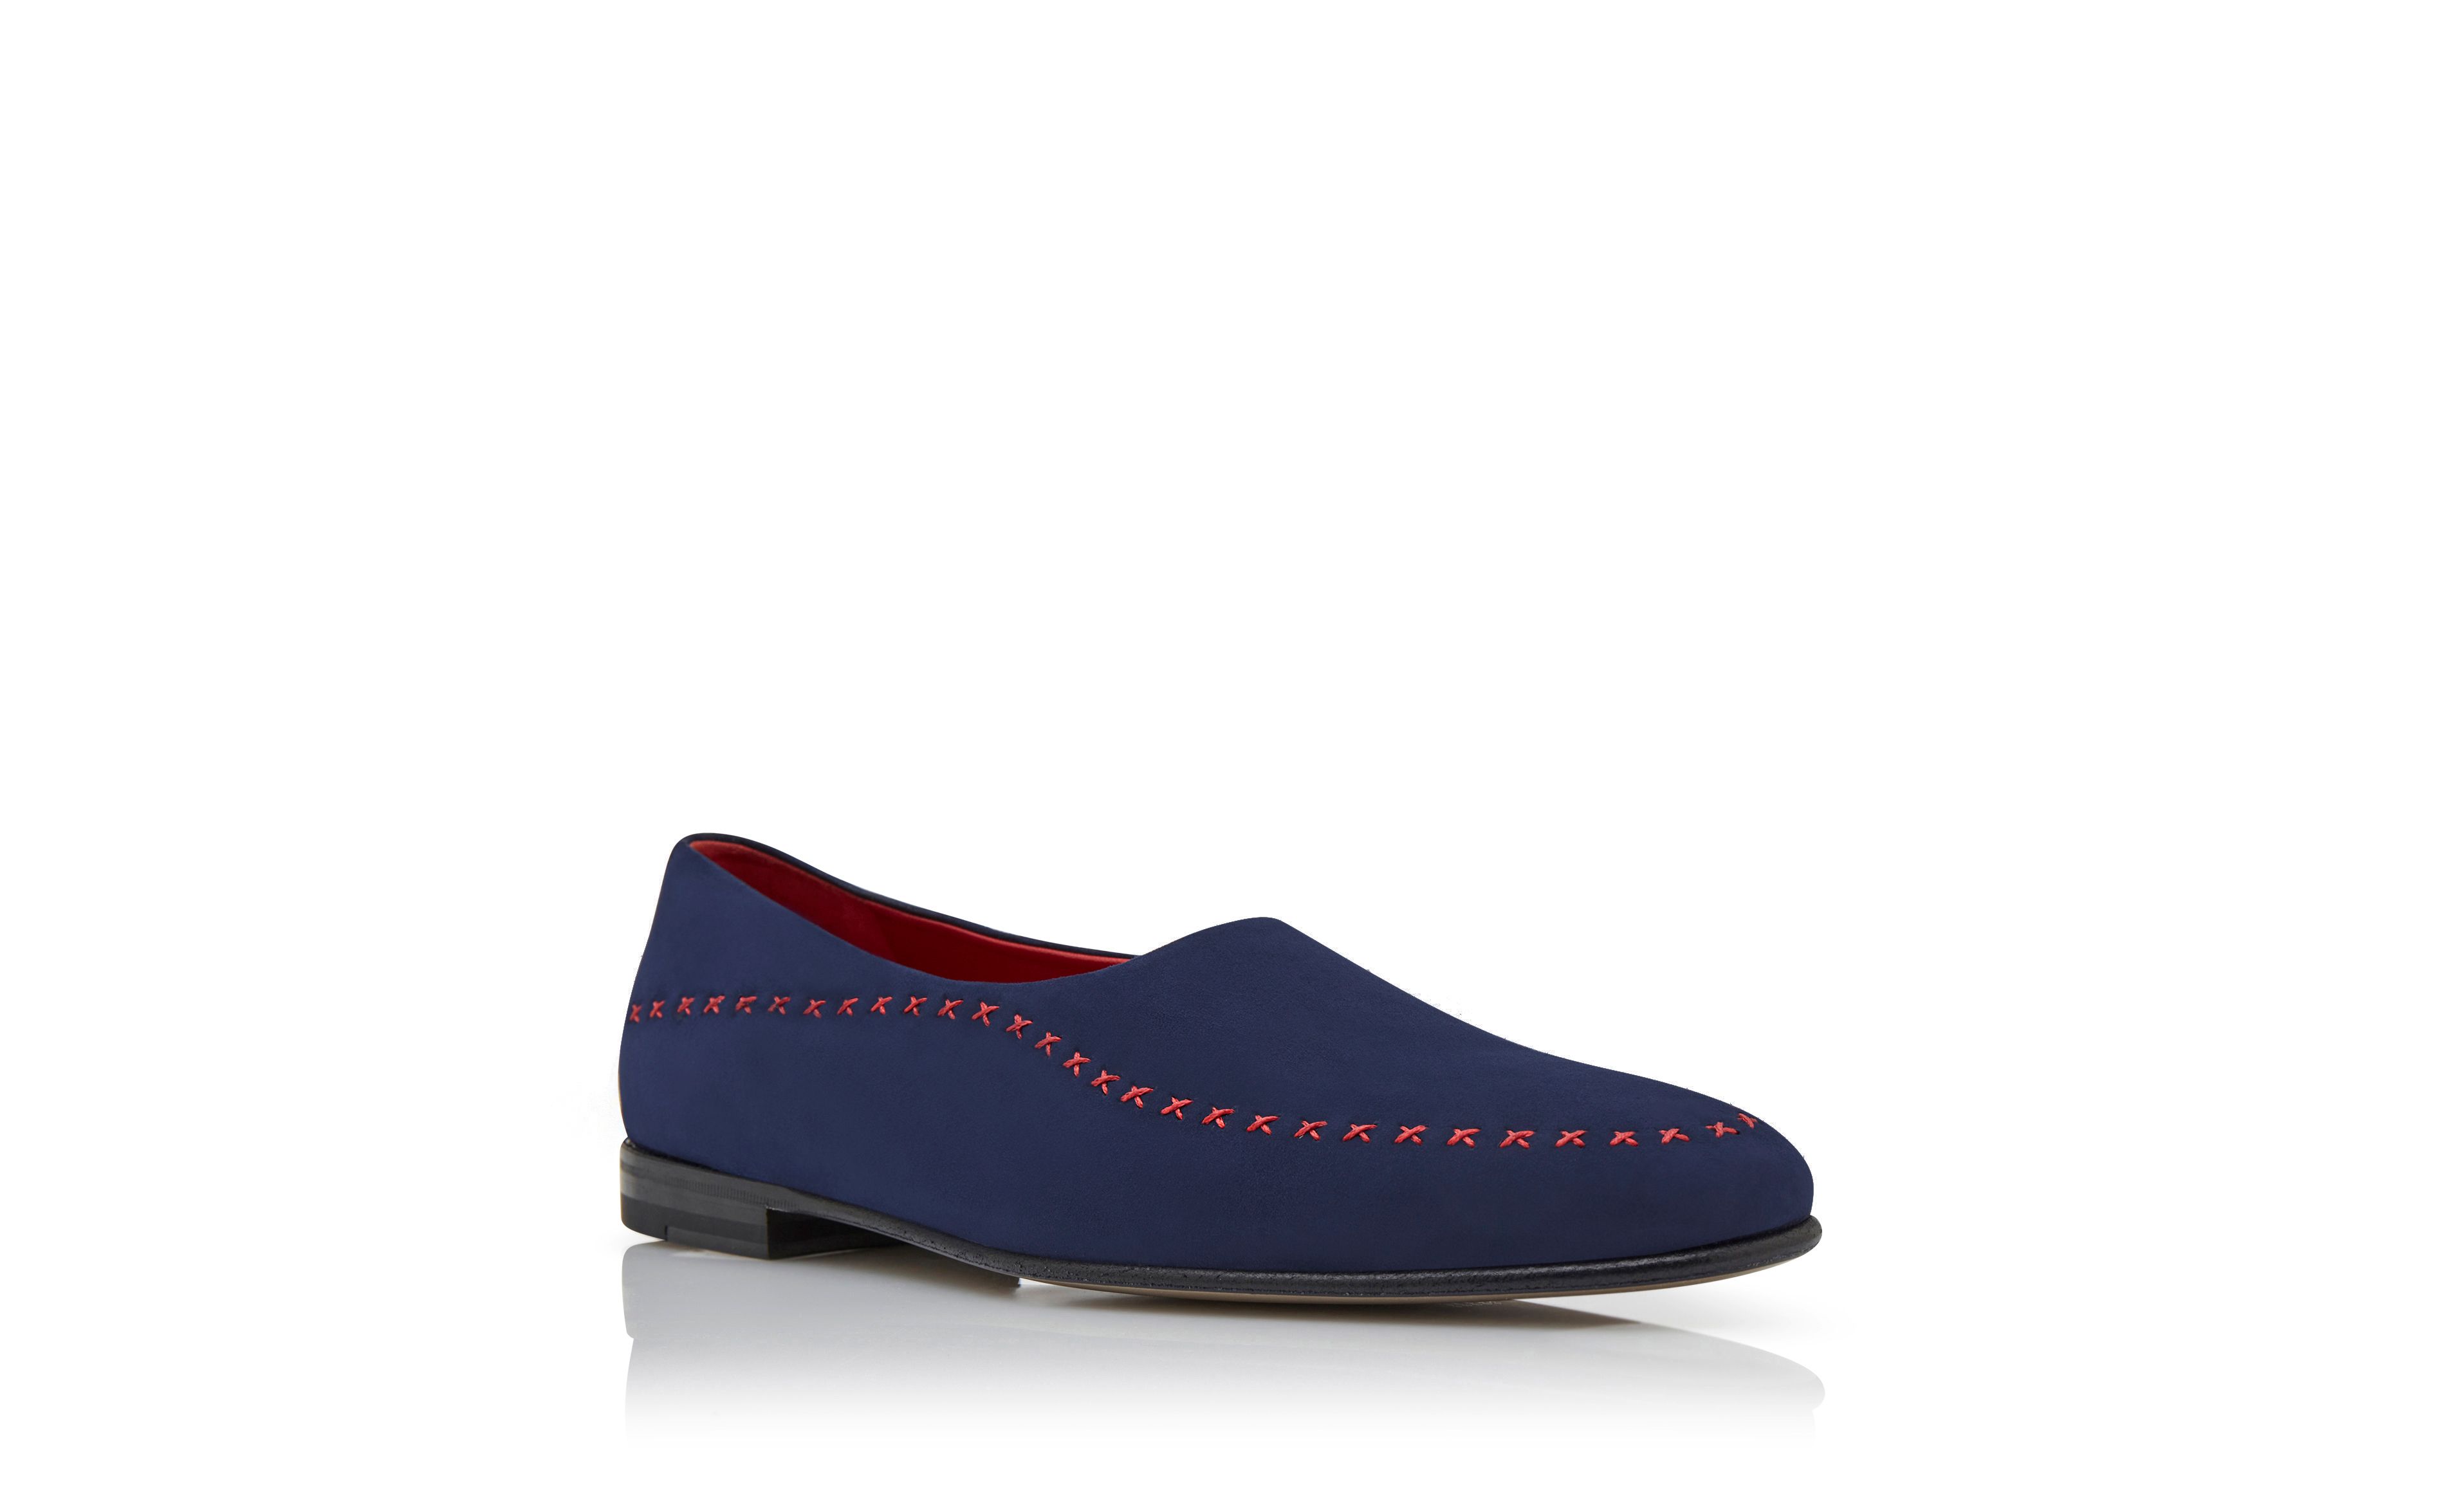 Designer Navy Blue and Red Suede Low Cut Slippers - Image Upsell